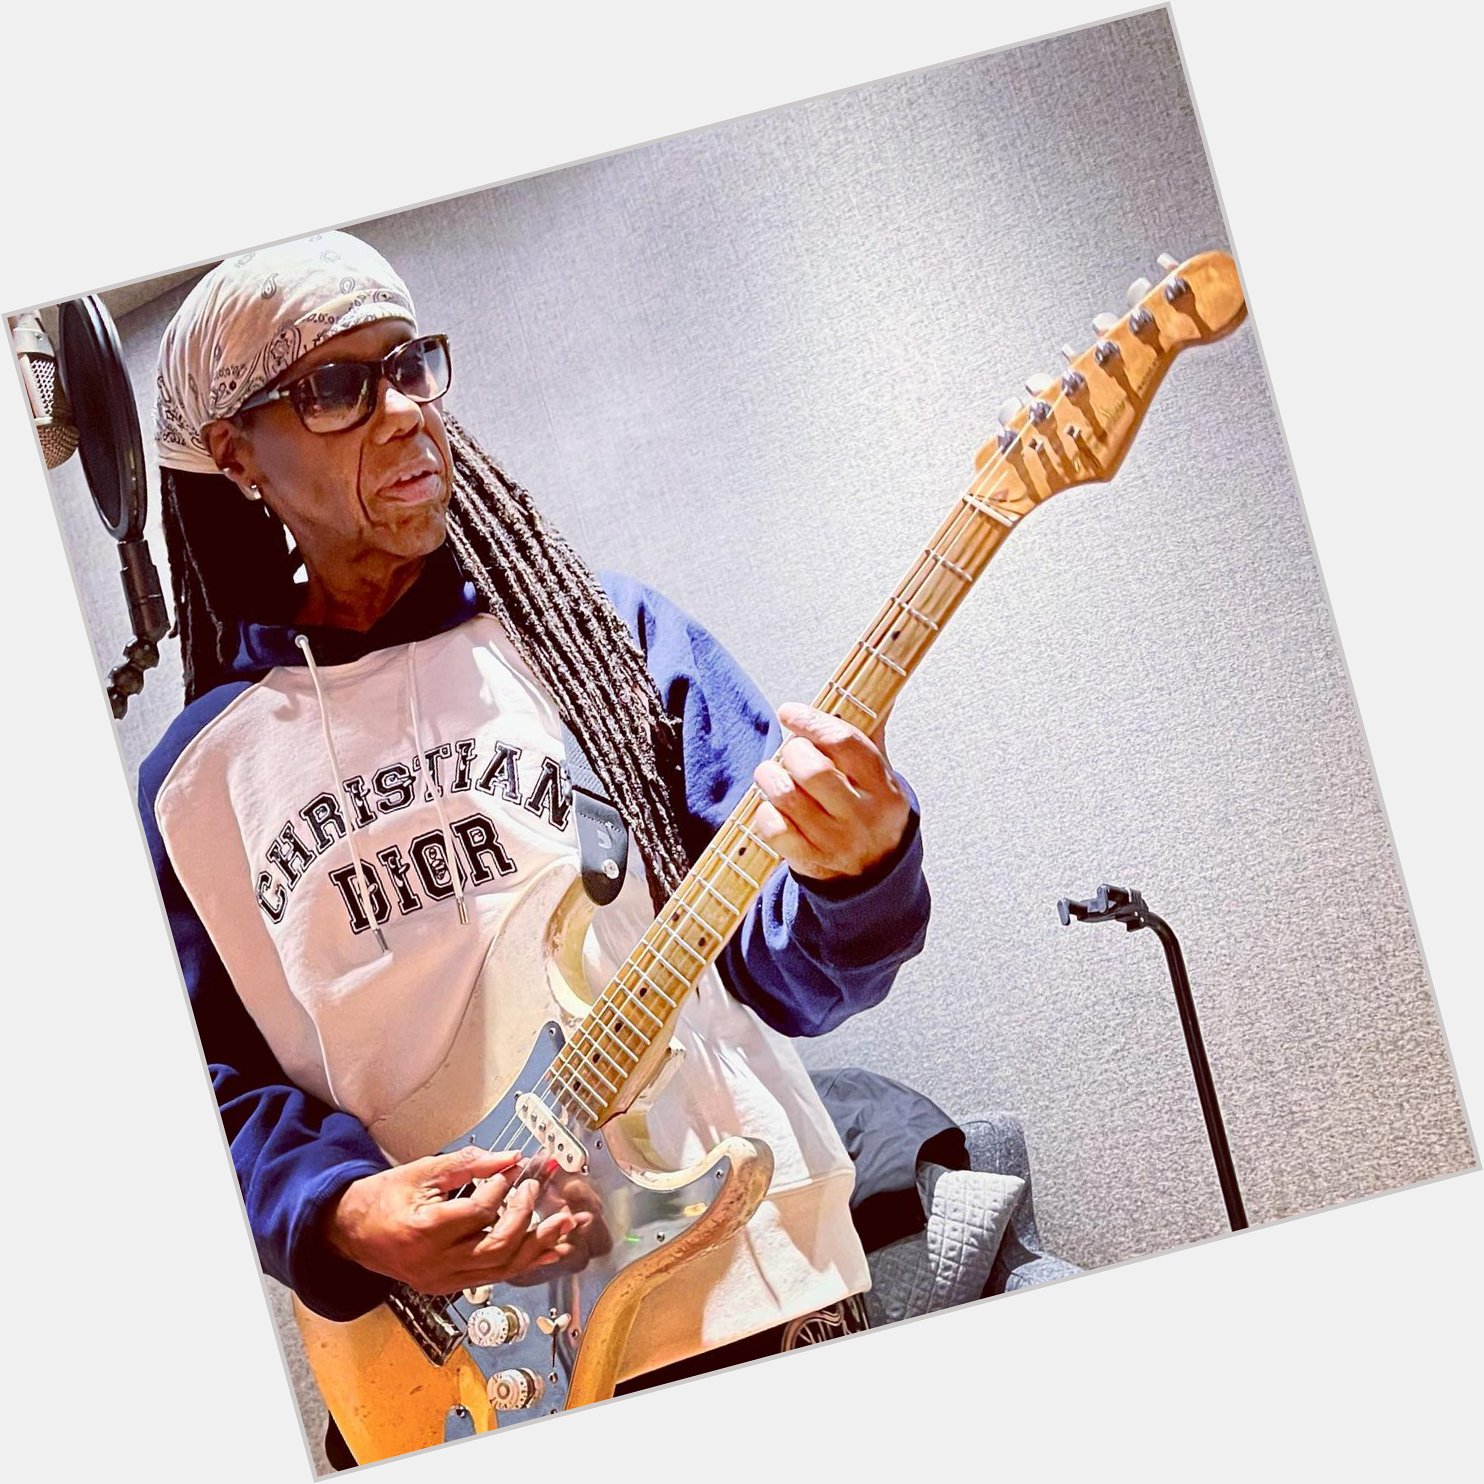 Happy birthday to Nile Rodgers (Chic) 
September 19, 1952. 